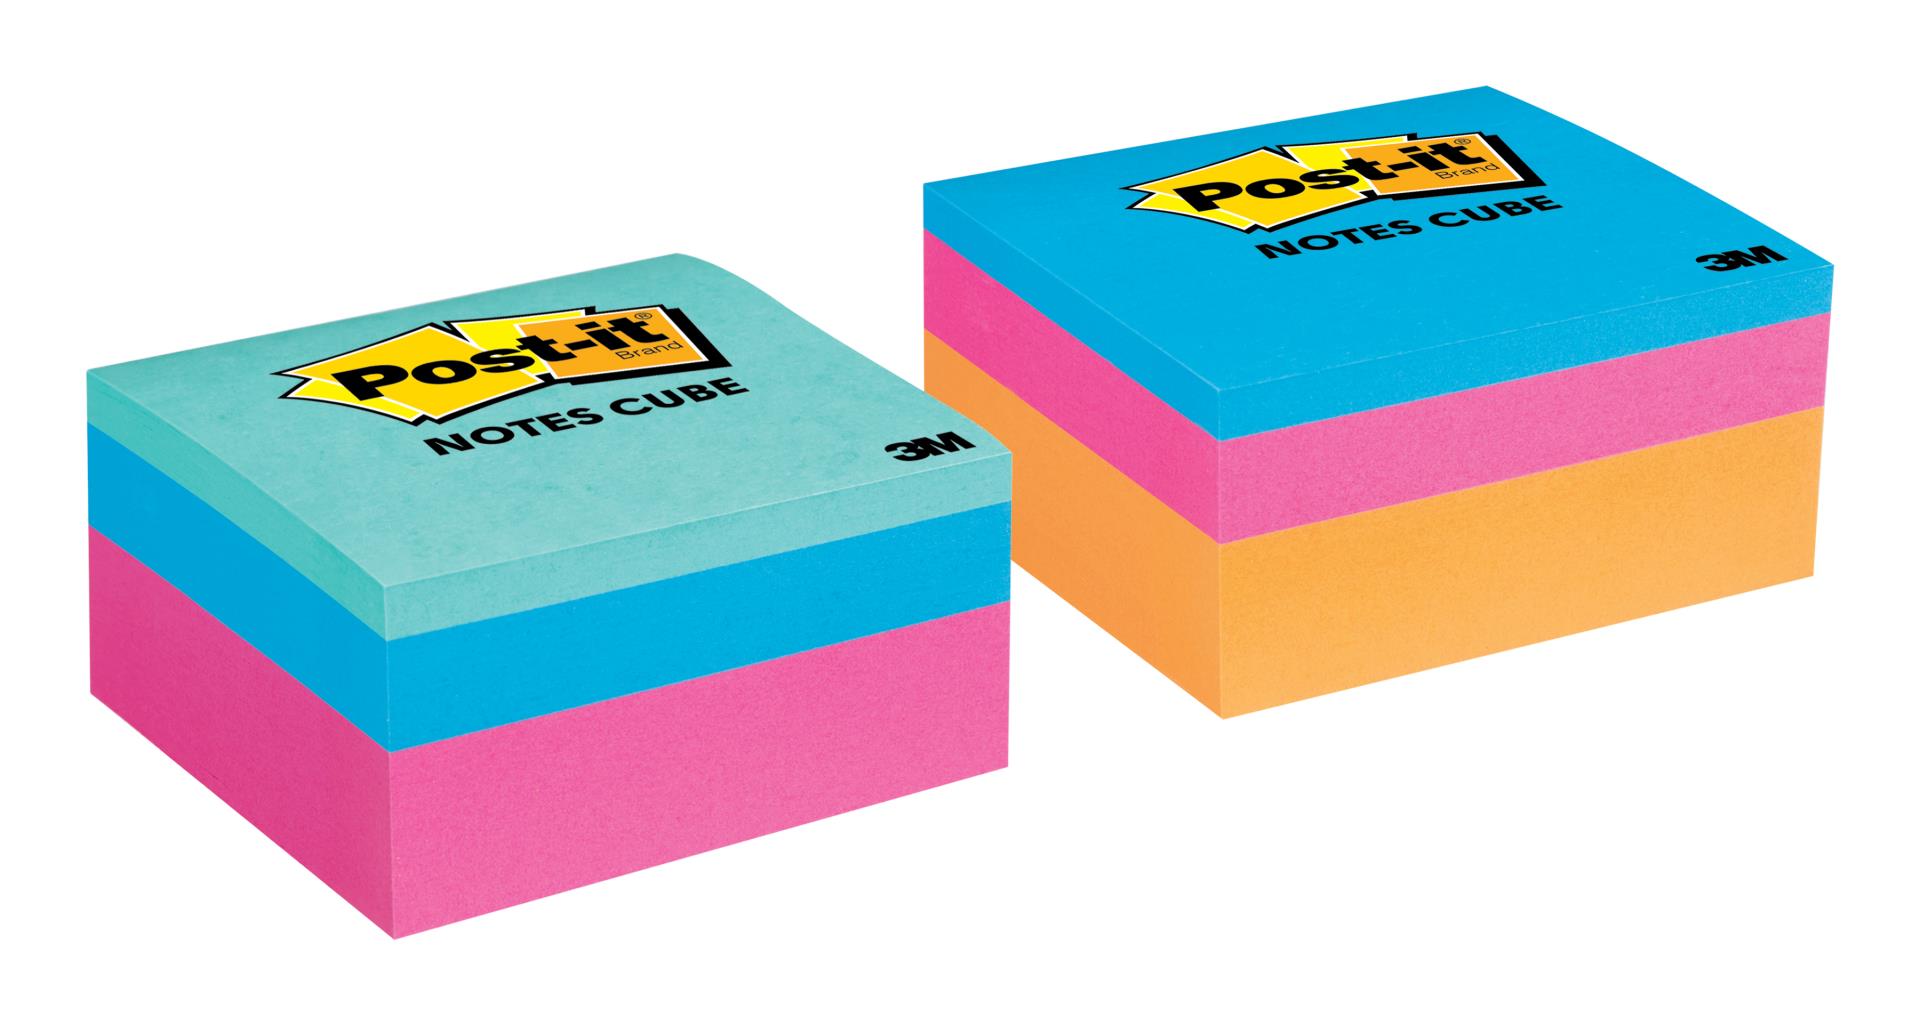 7010333418 - Post-it® Notes Cube 2027-PKOR, 3 in x 3 in (76 mm x 76 mm), Mixed Case, Pink Wave and Orange Wave